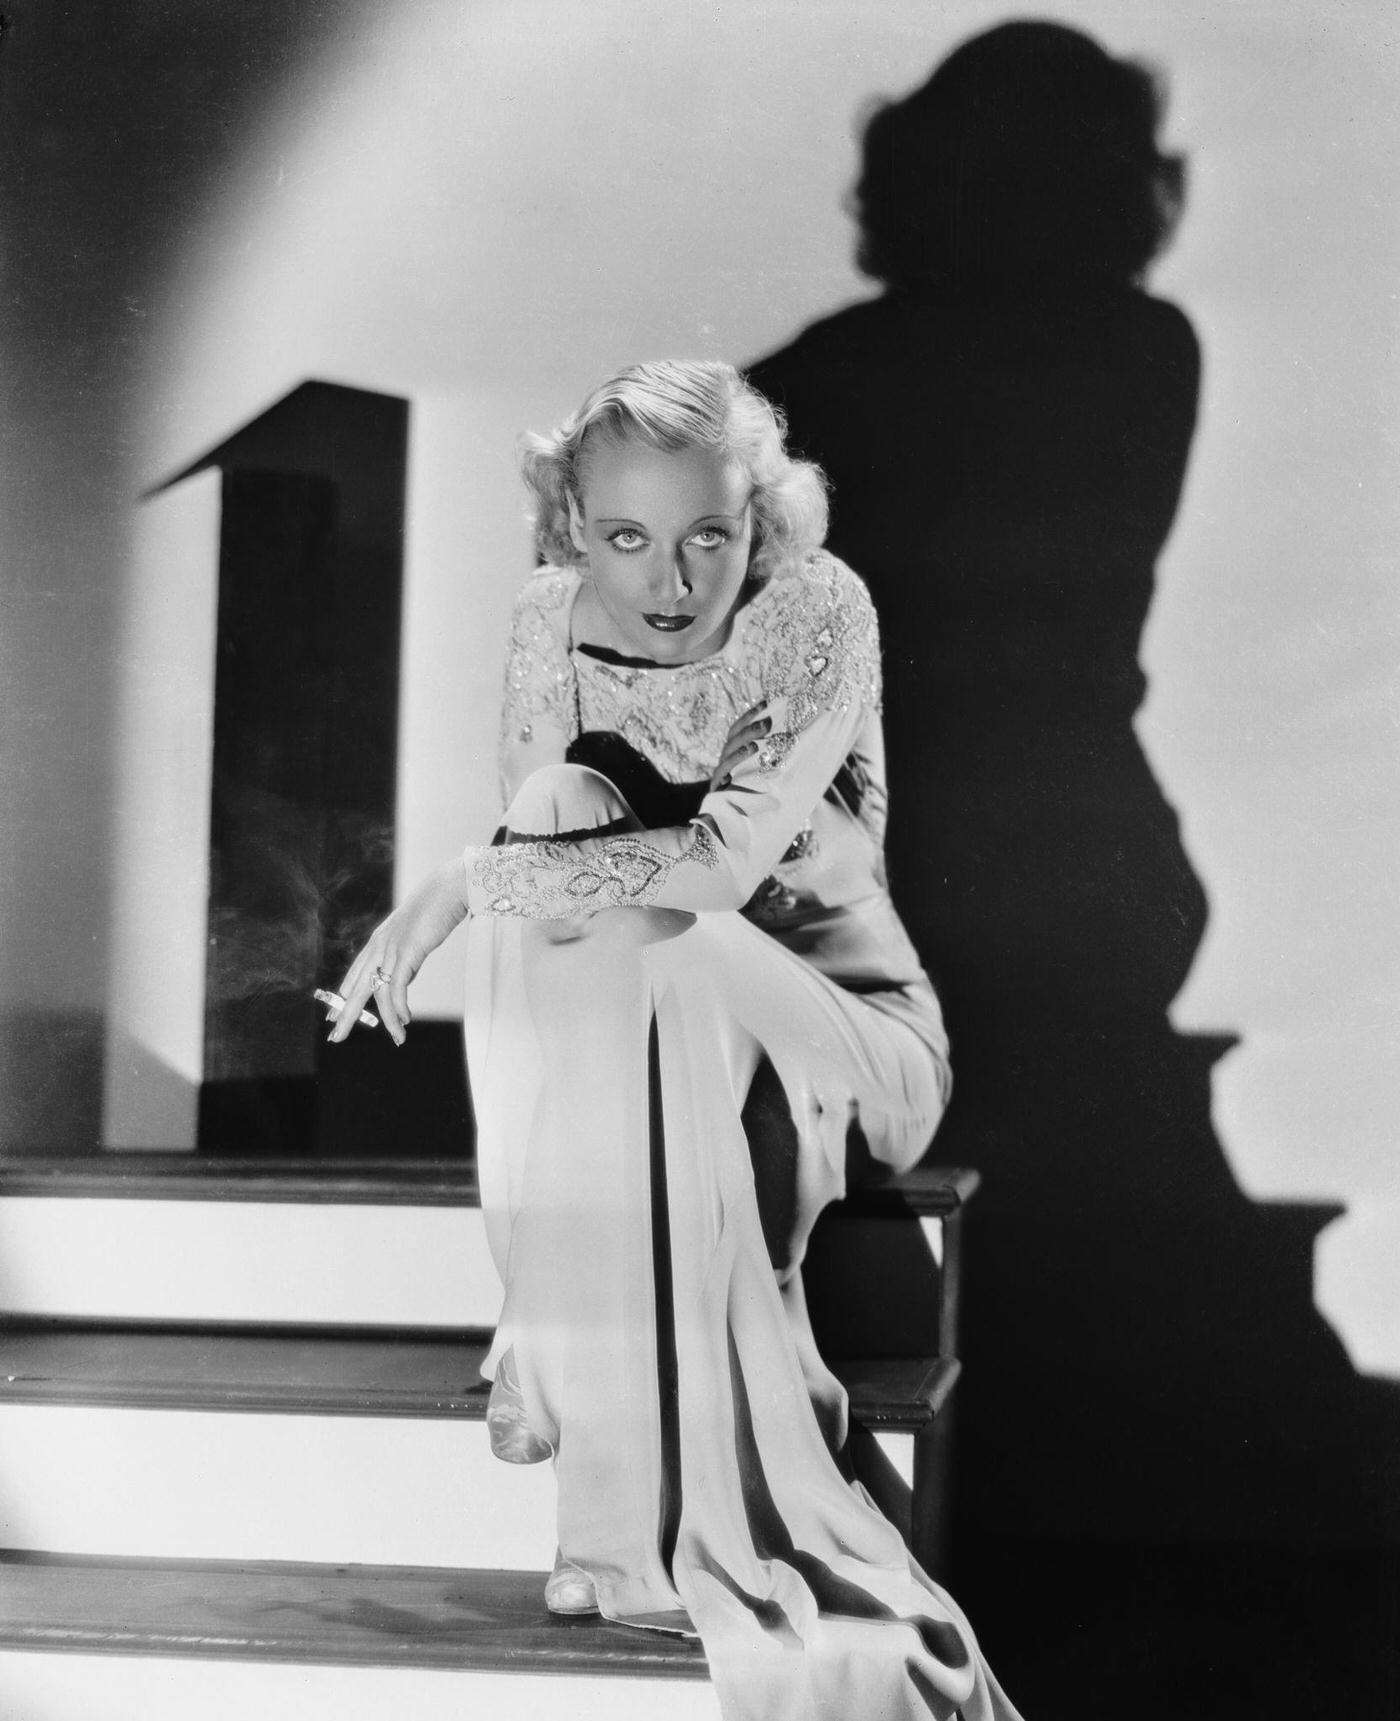 American film actress Carole Lombard casts a dramatic shadow against the wall, 1942.